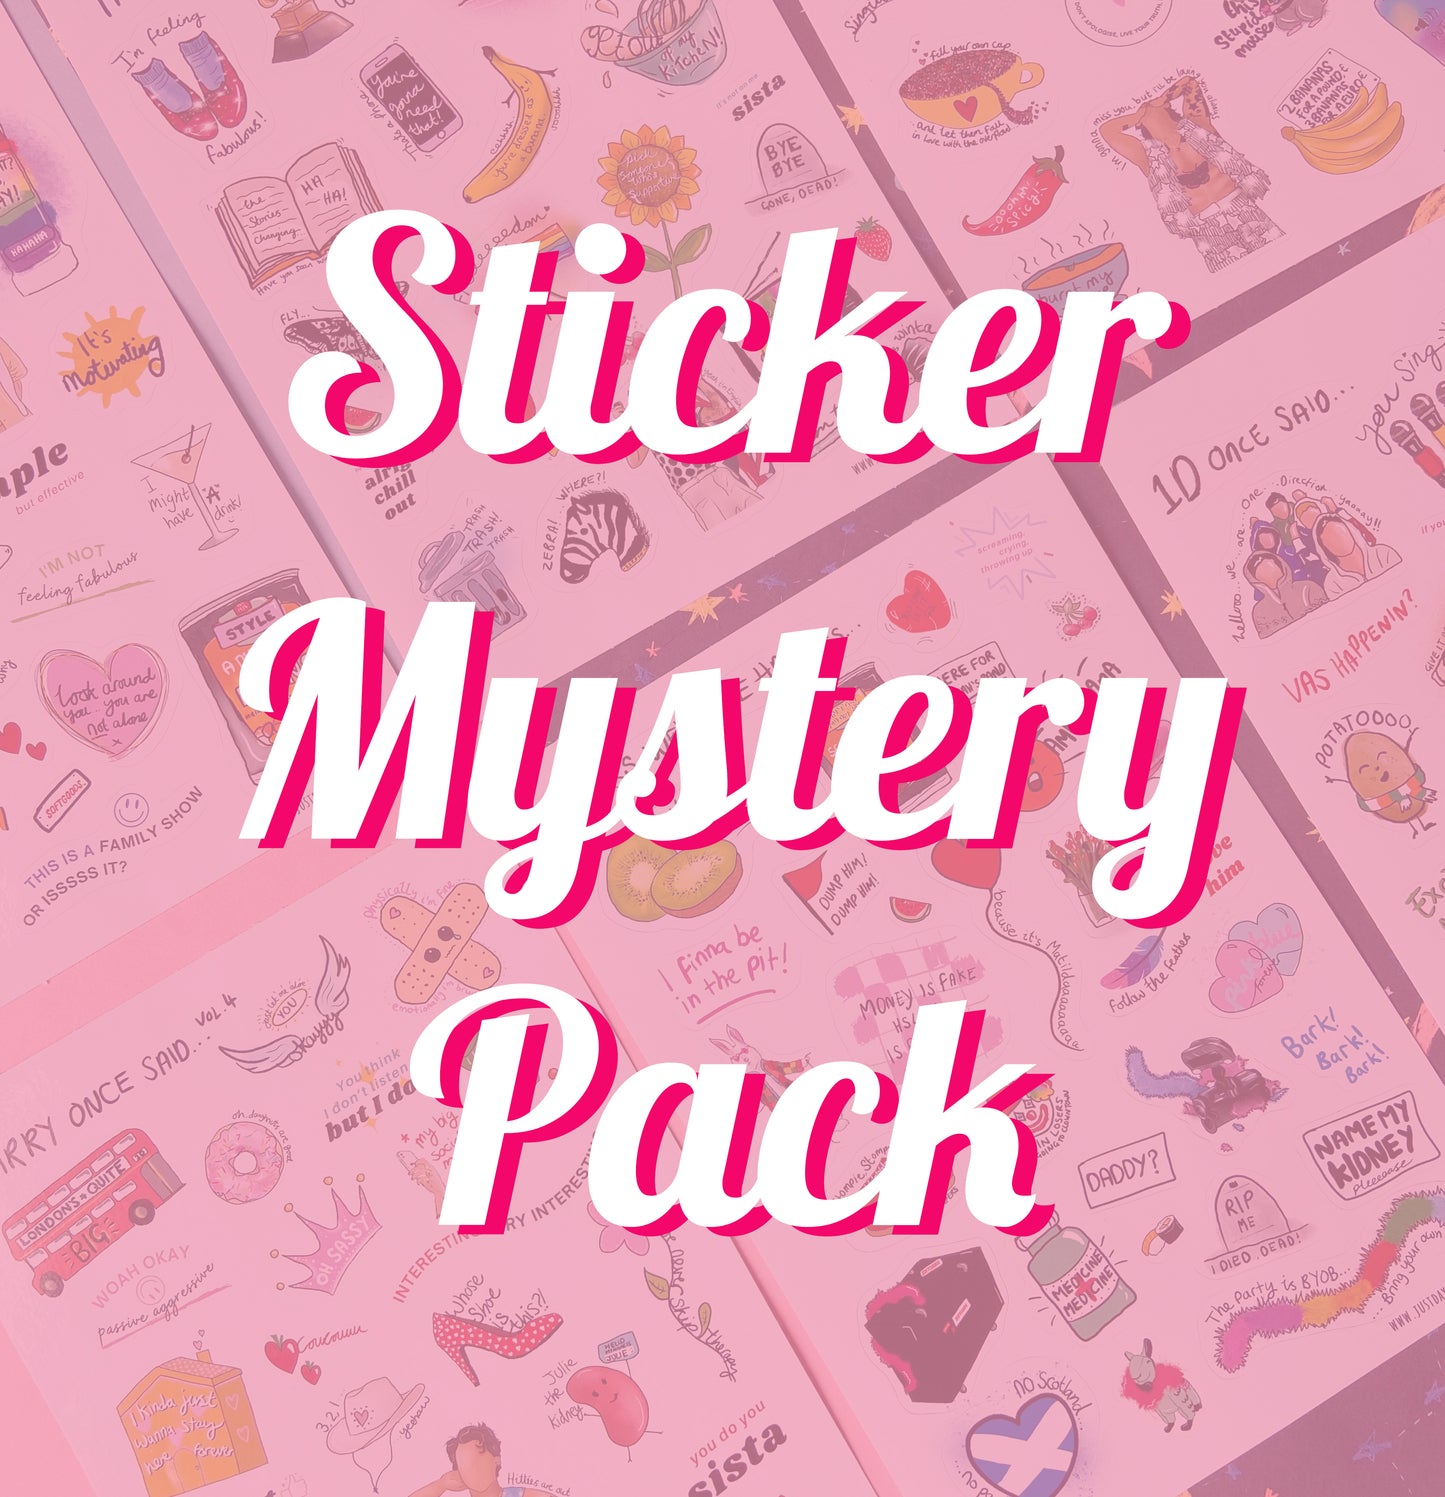 Mystery Sticker Pack, Harries Gift